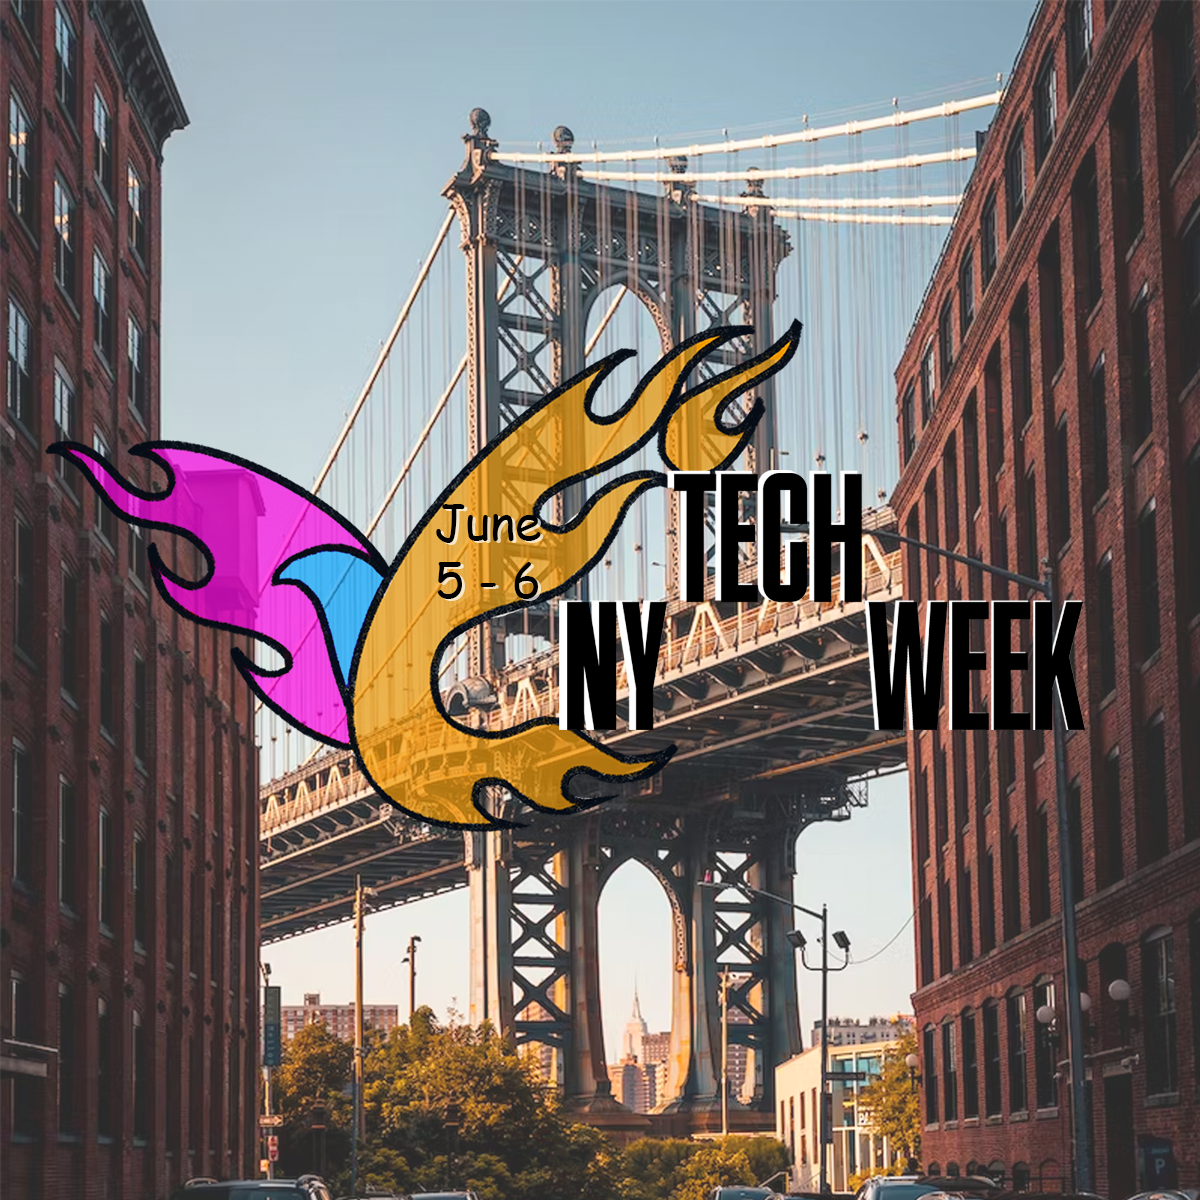 Connect with LatinAmerican business and tech leaders in Brooklyn during NYC Tech Week